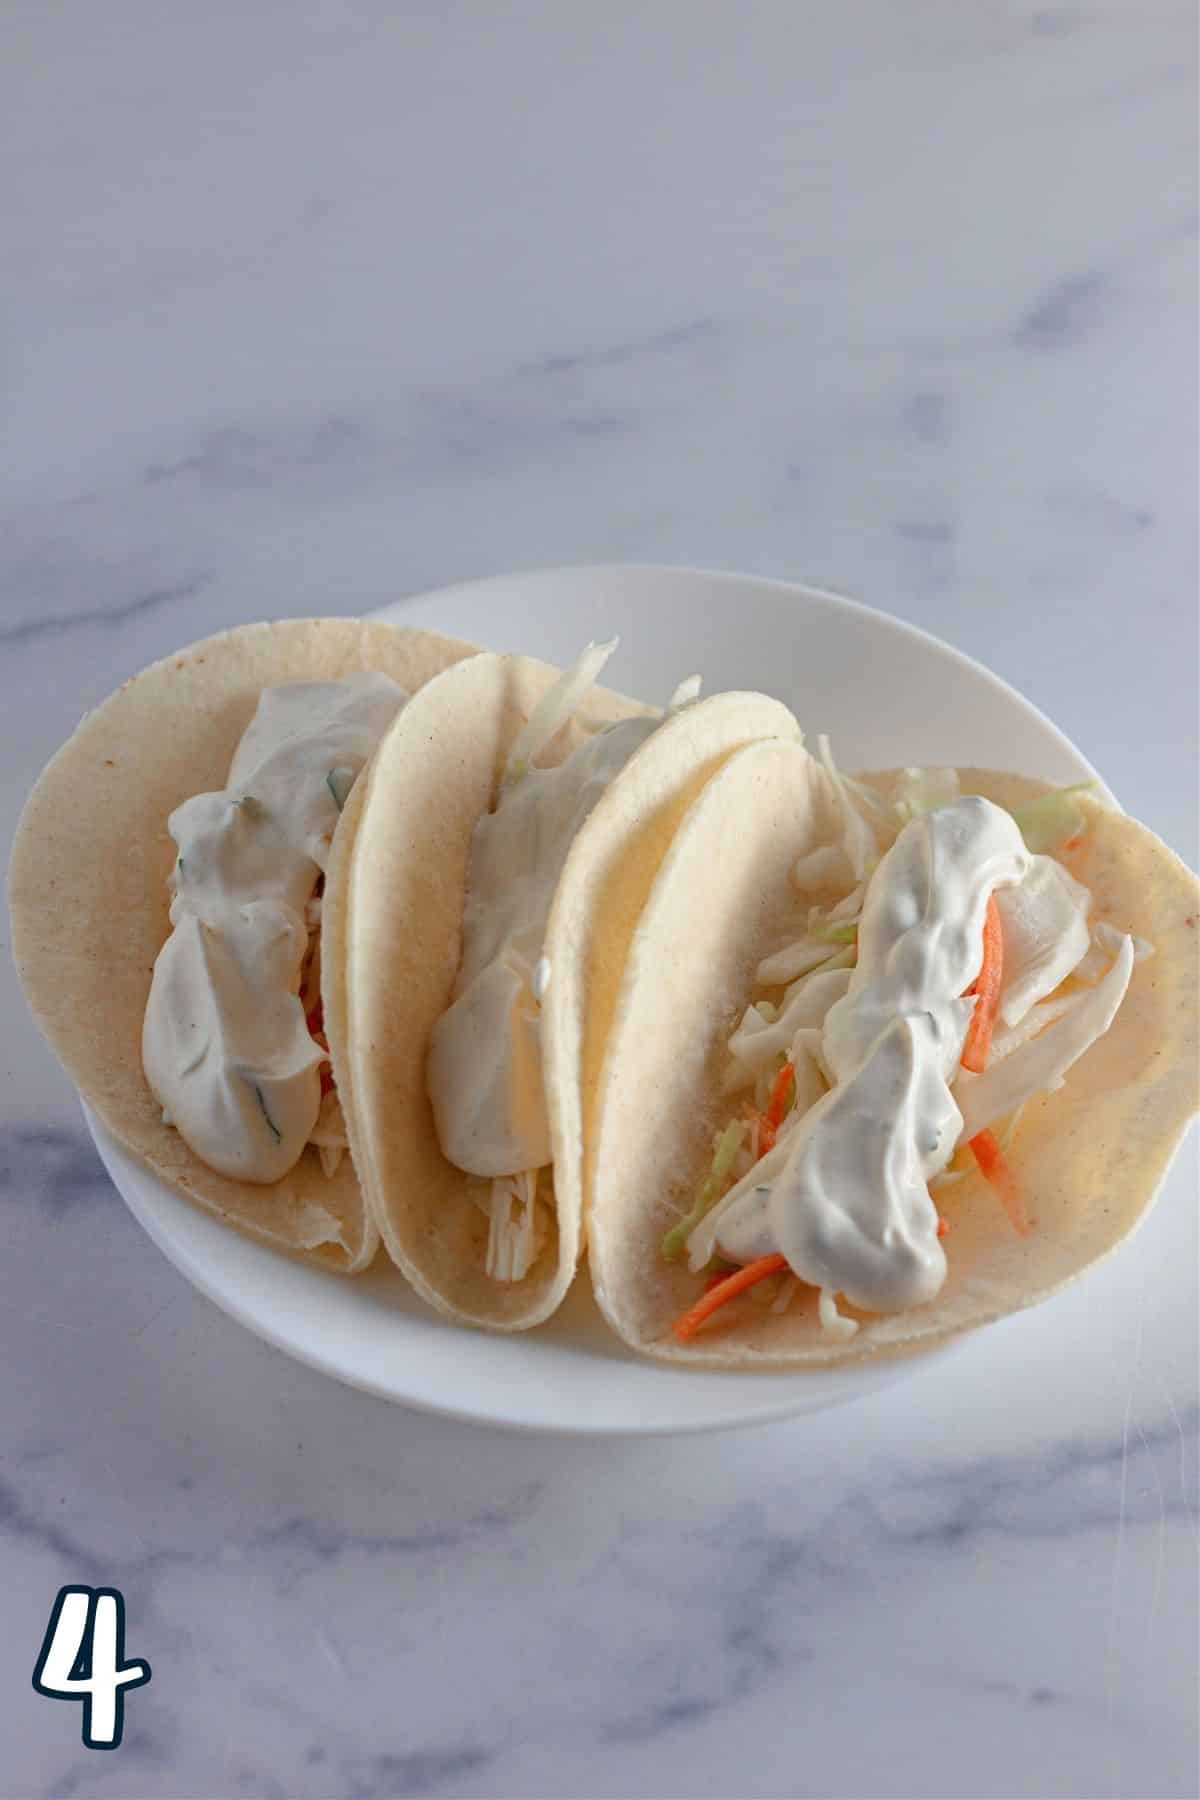 Sour cream cilantro sauce poured over shredded cabbage in a taco shell.